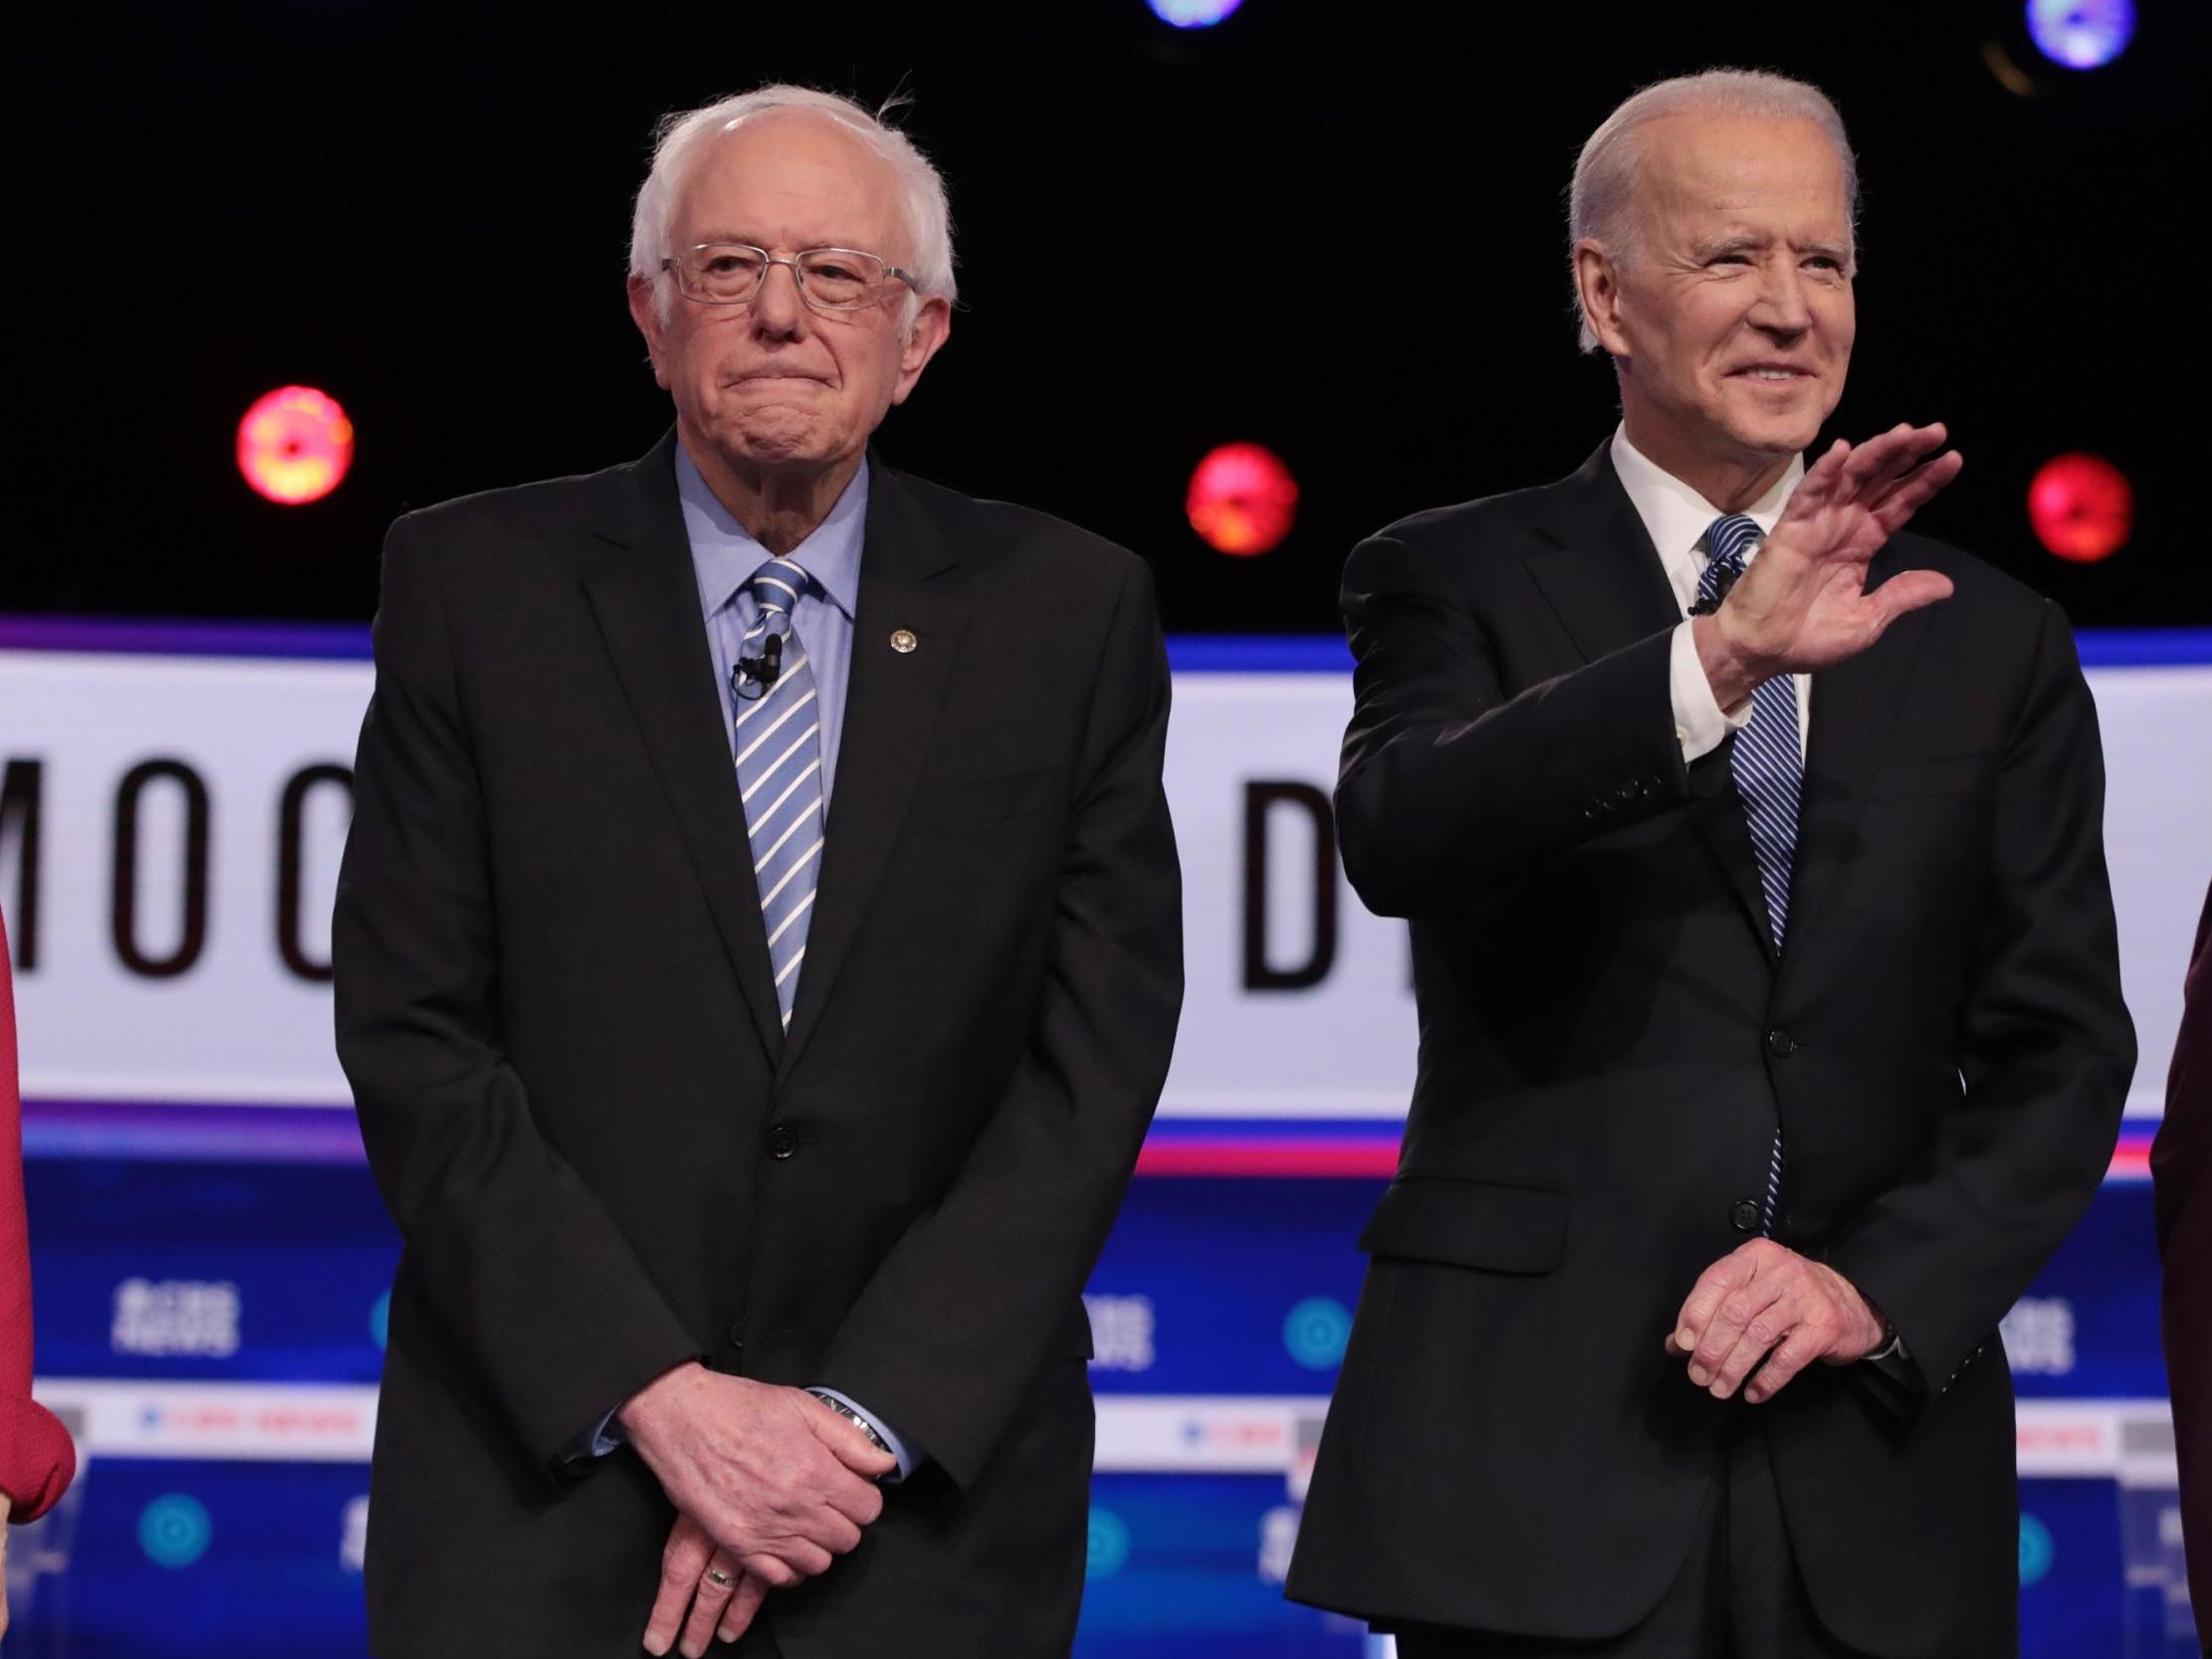 Democratic primary: Michigan is going to be Sanders and Biden's most important battle yet